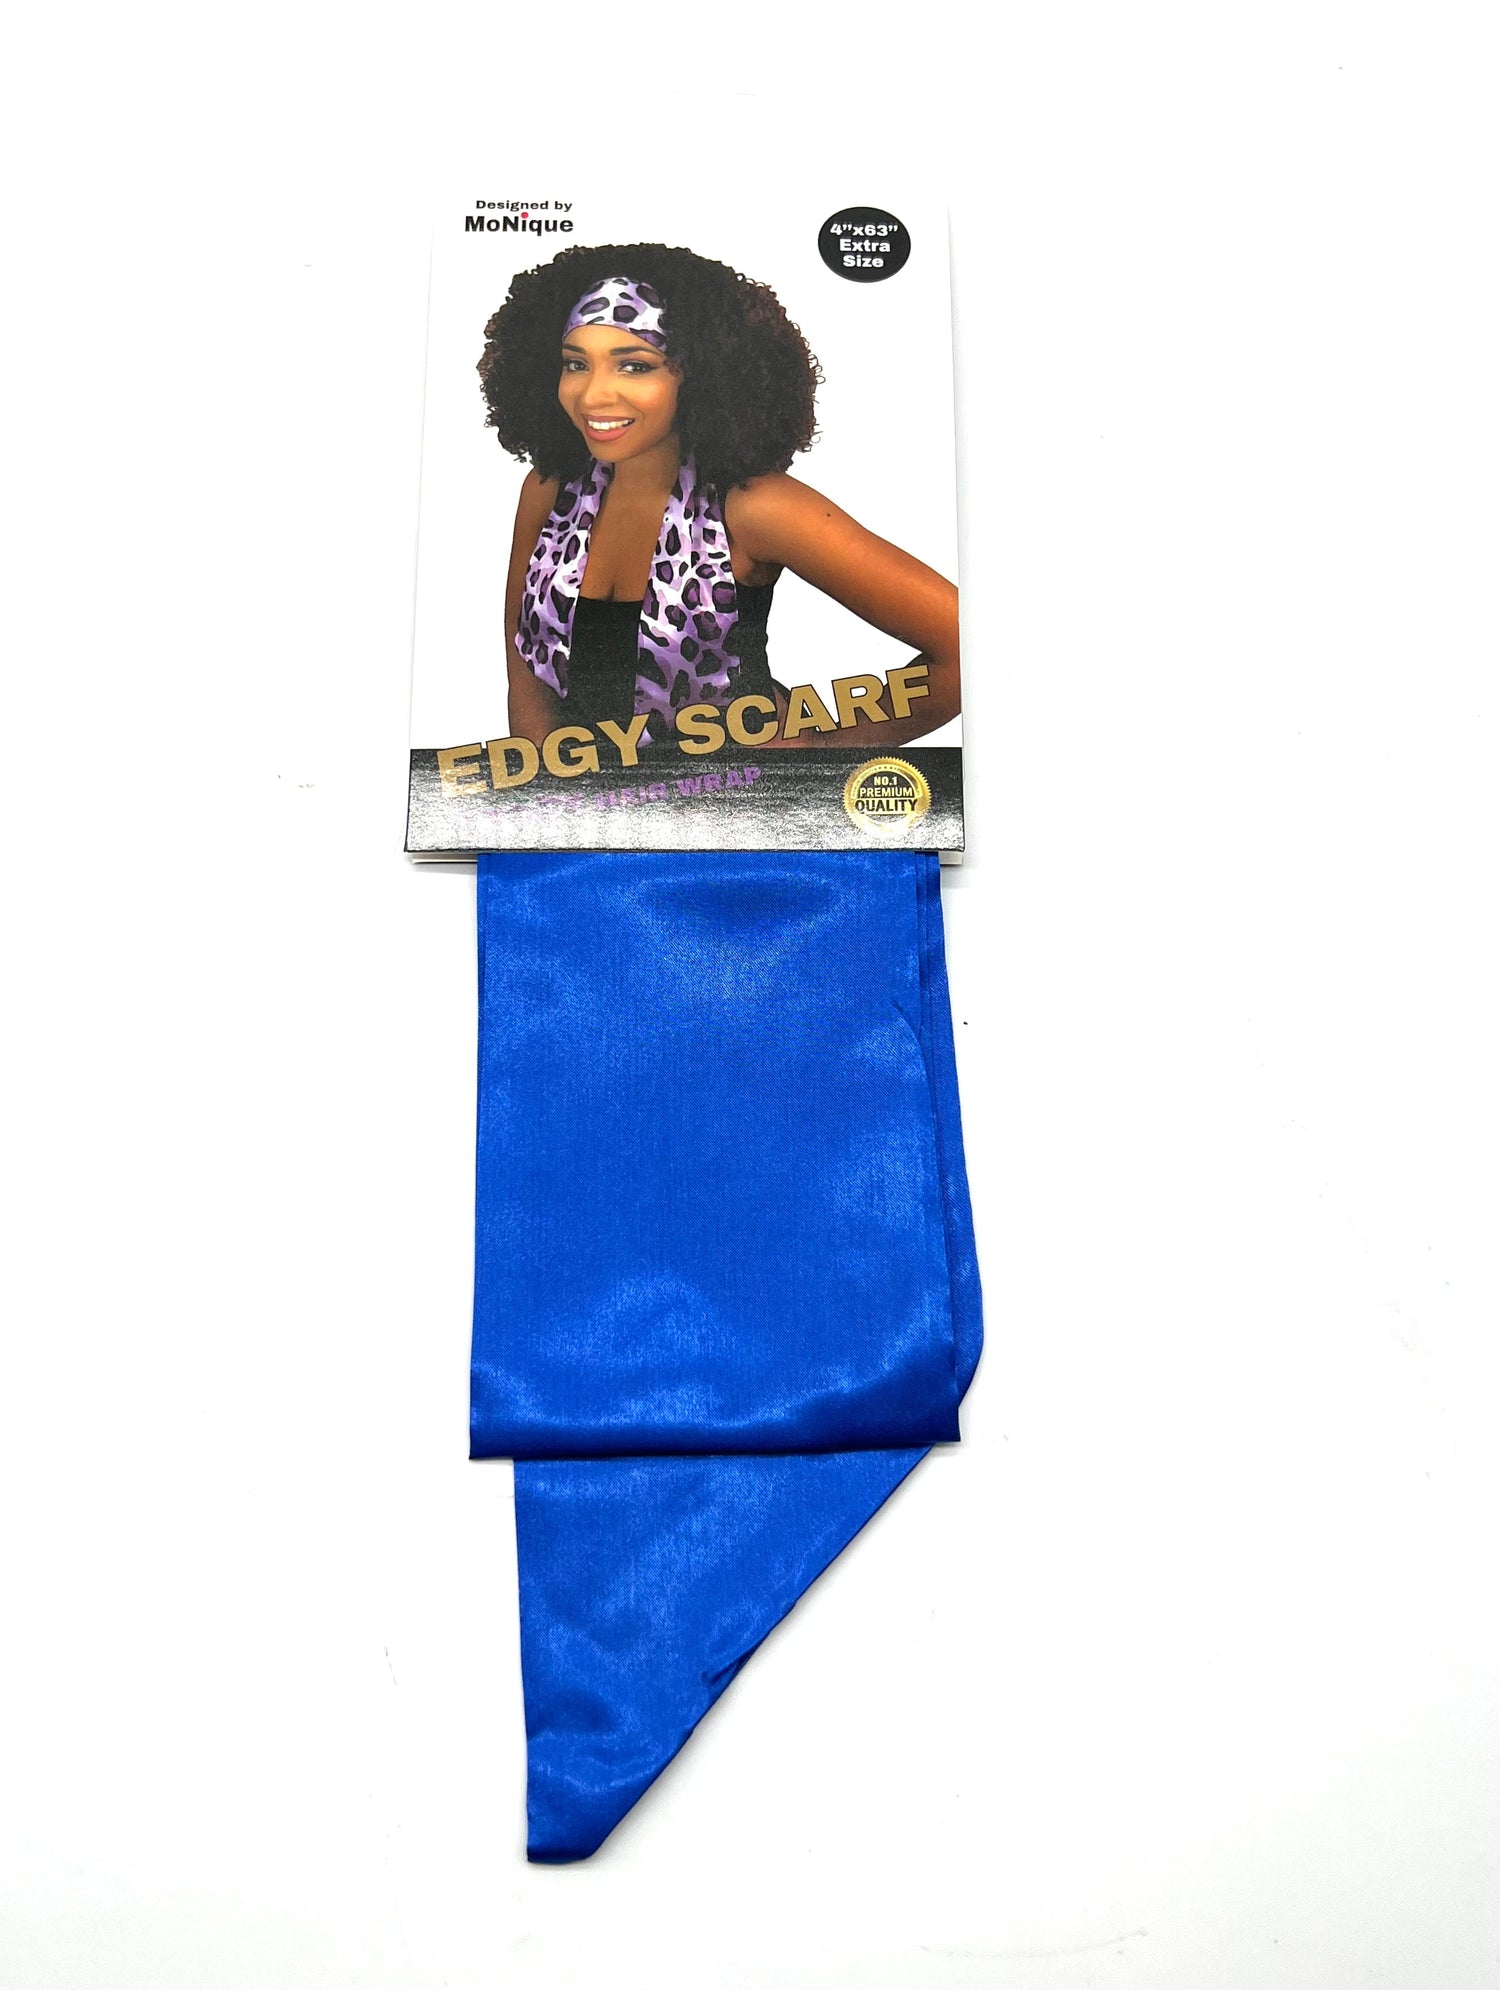 MONIQUE TRENDY EDGY SCARF - VIP Extensions